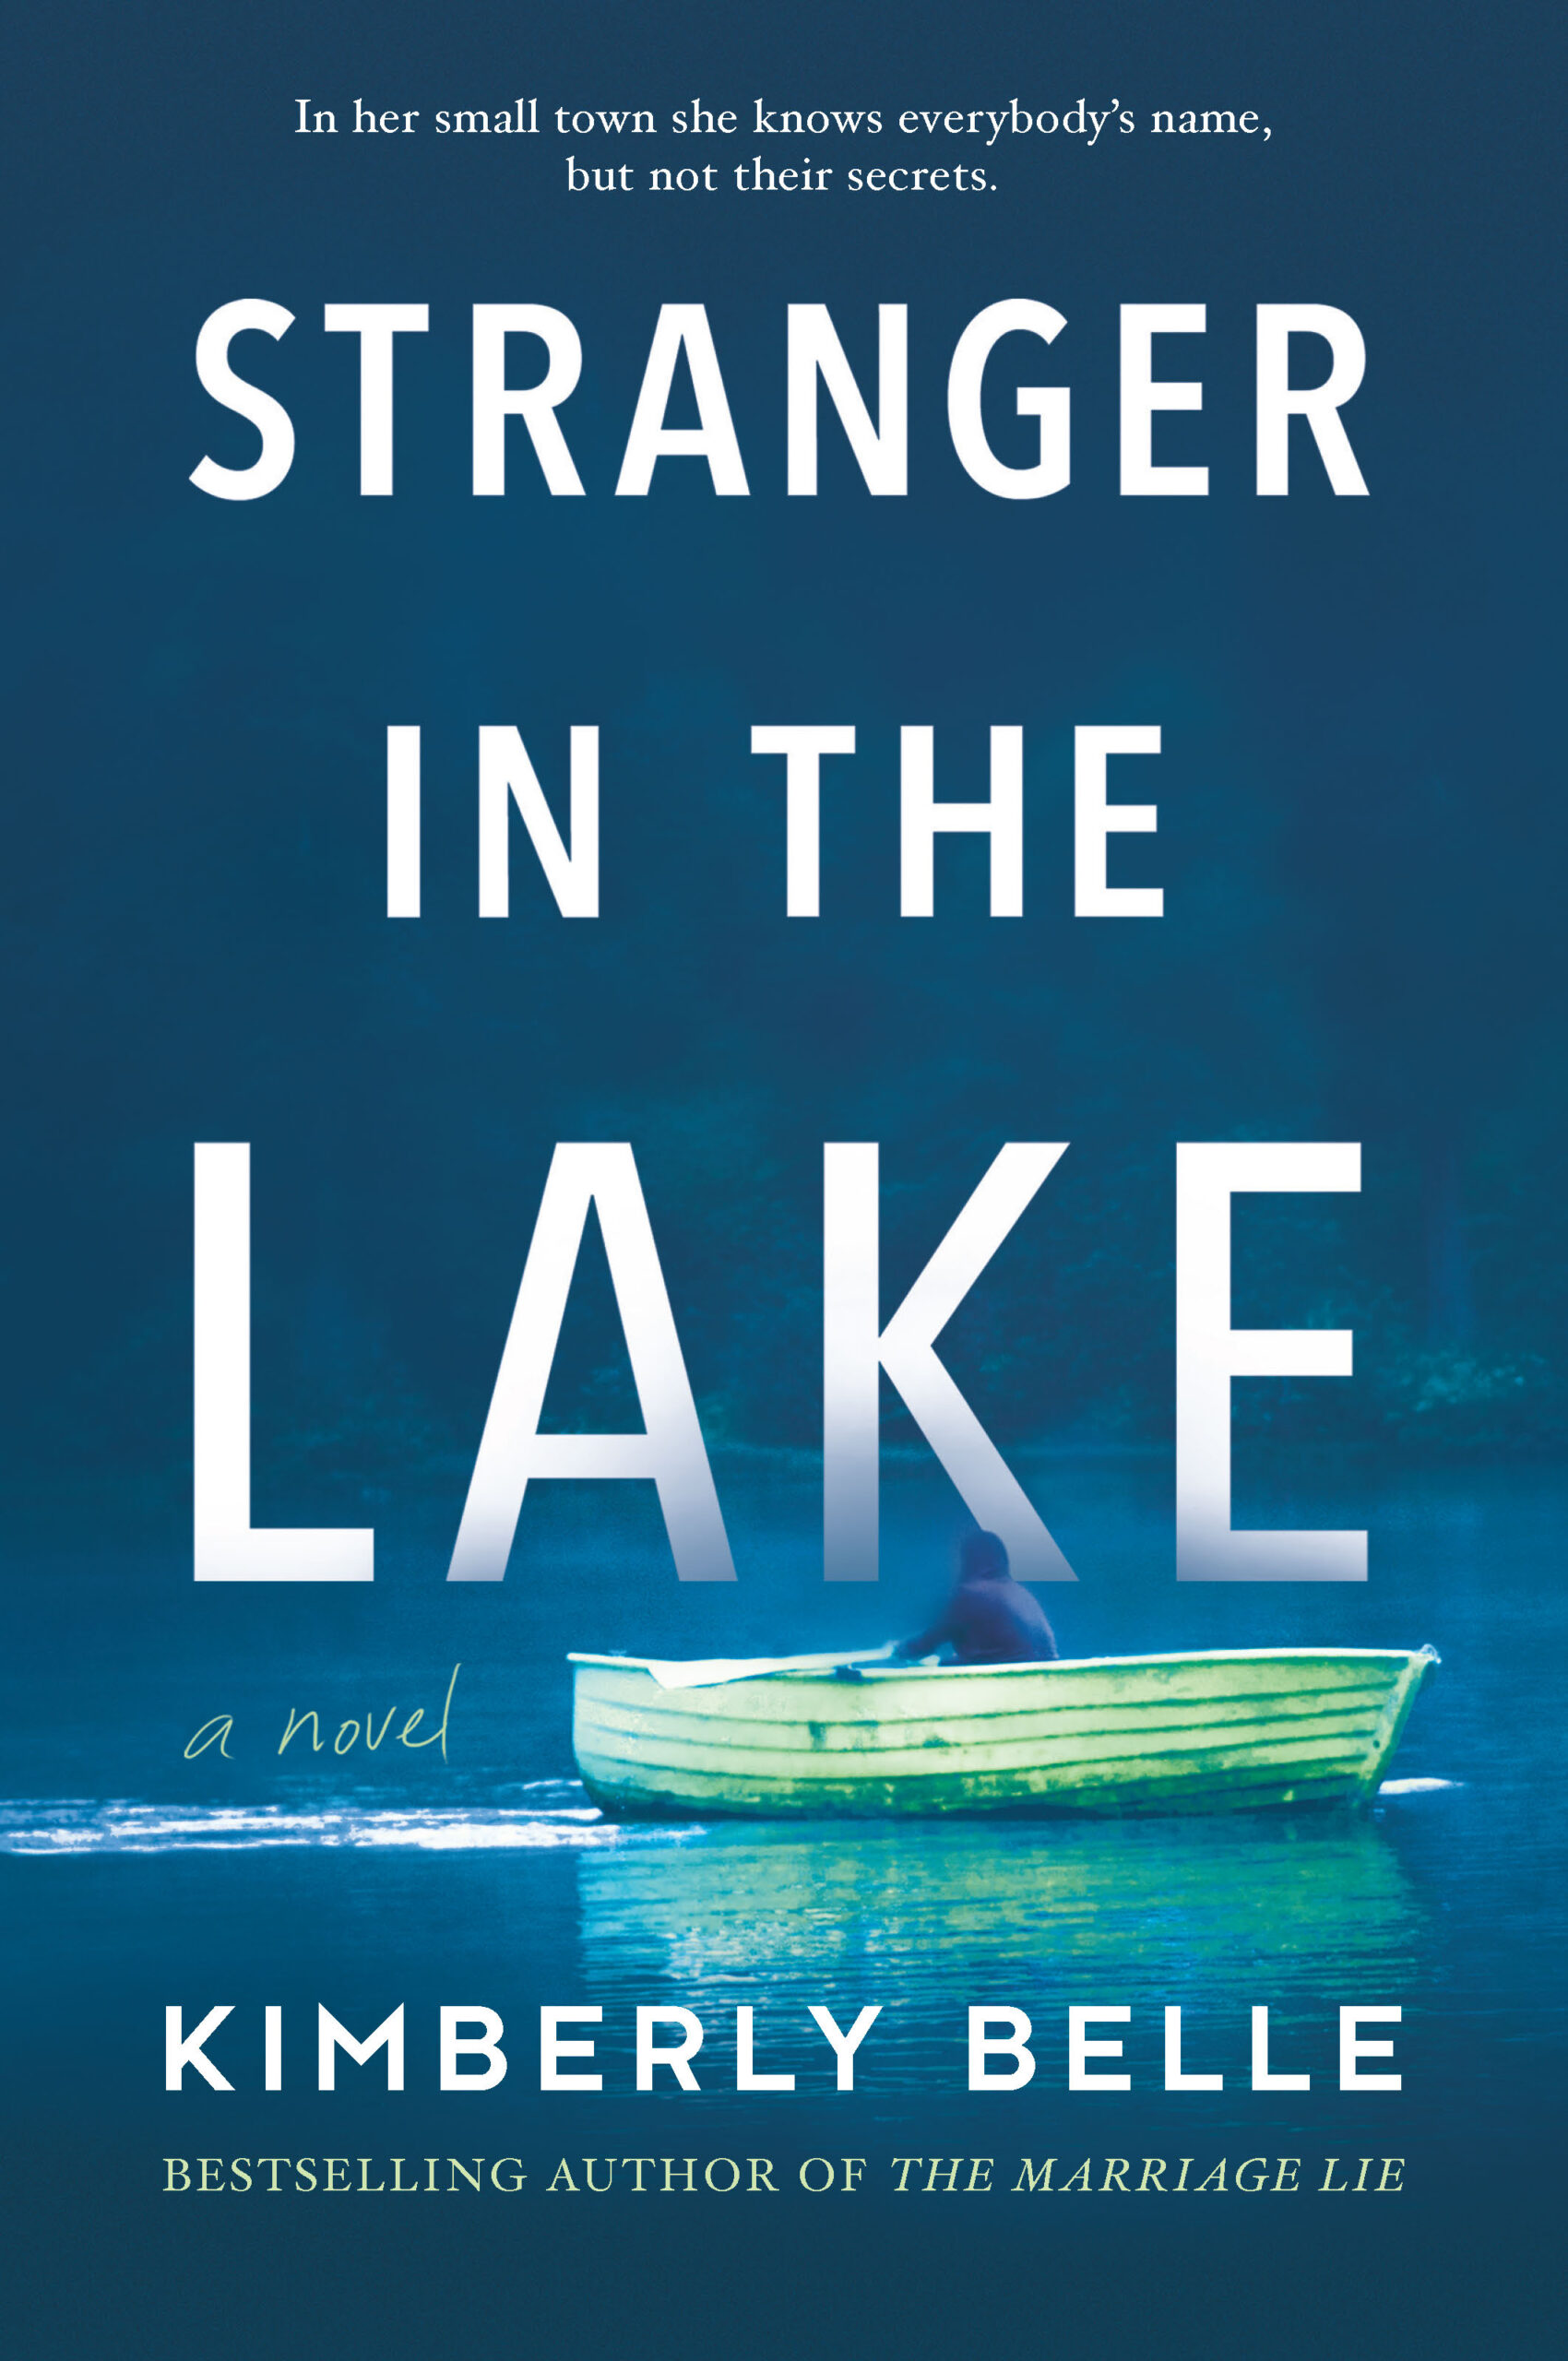 Review: Stranger in the Lake by Kimberly Belle